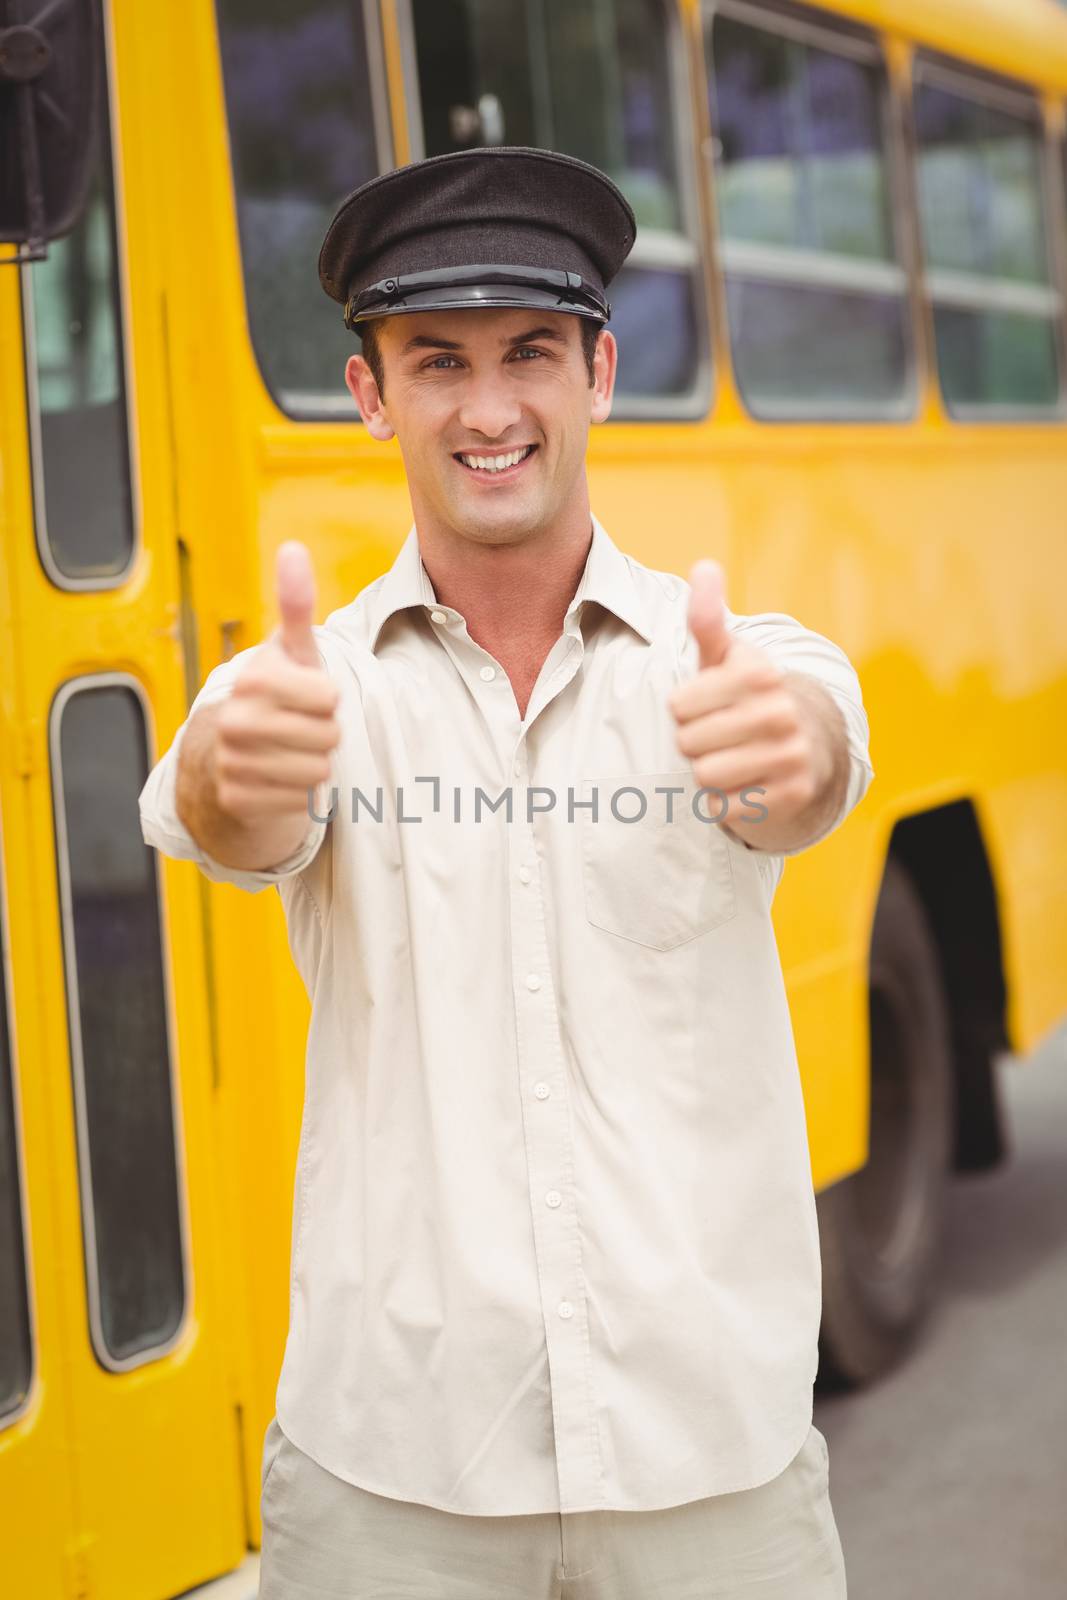 Smiling bus driver looking at camera by Wavebreakmedia